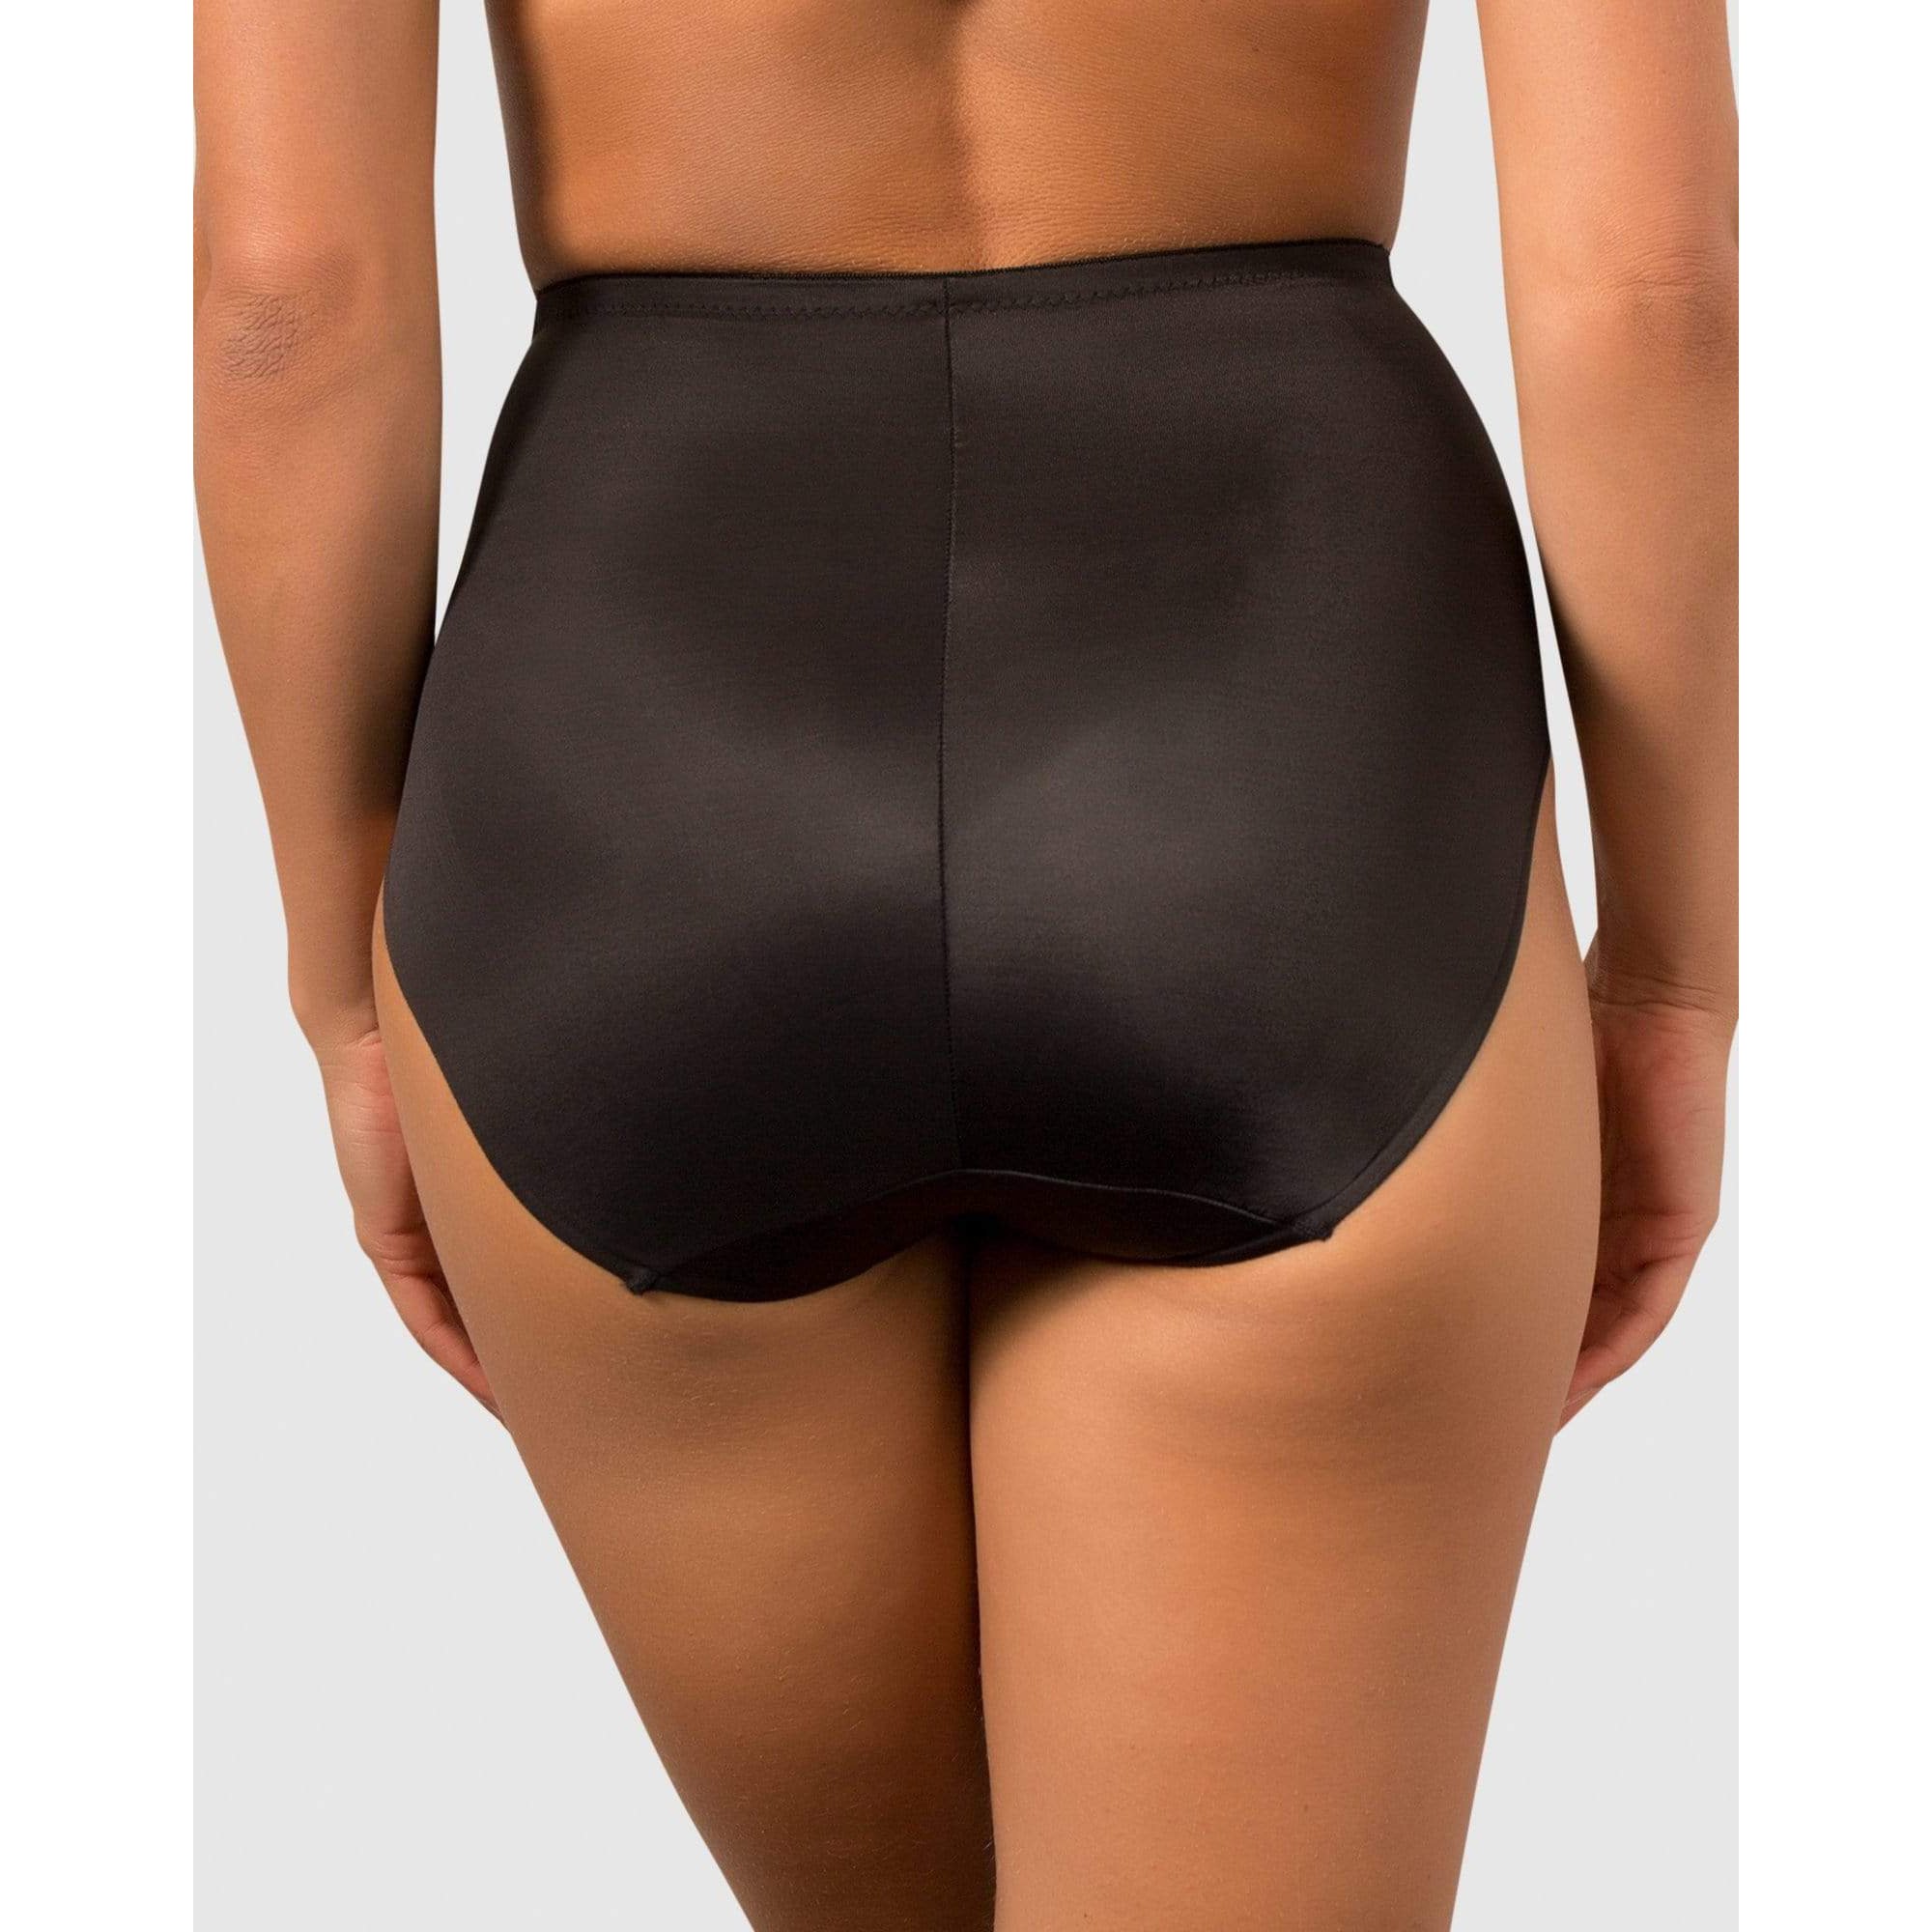 Miraclesuit Shapewear Panty Waistline Brief from Illusions Lingerie in Melbourne